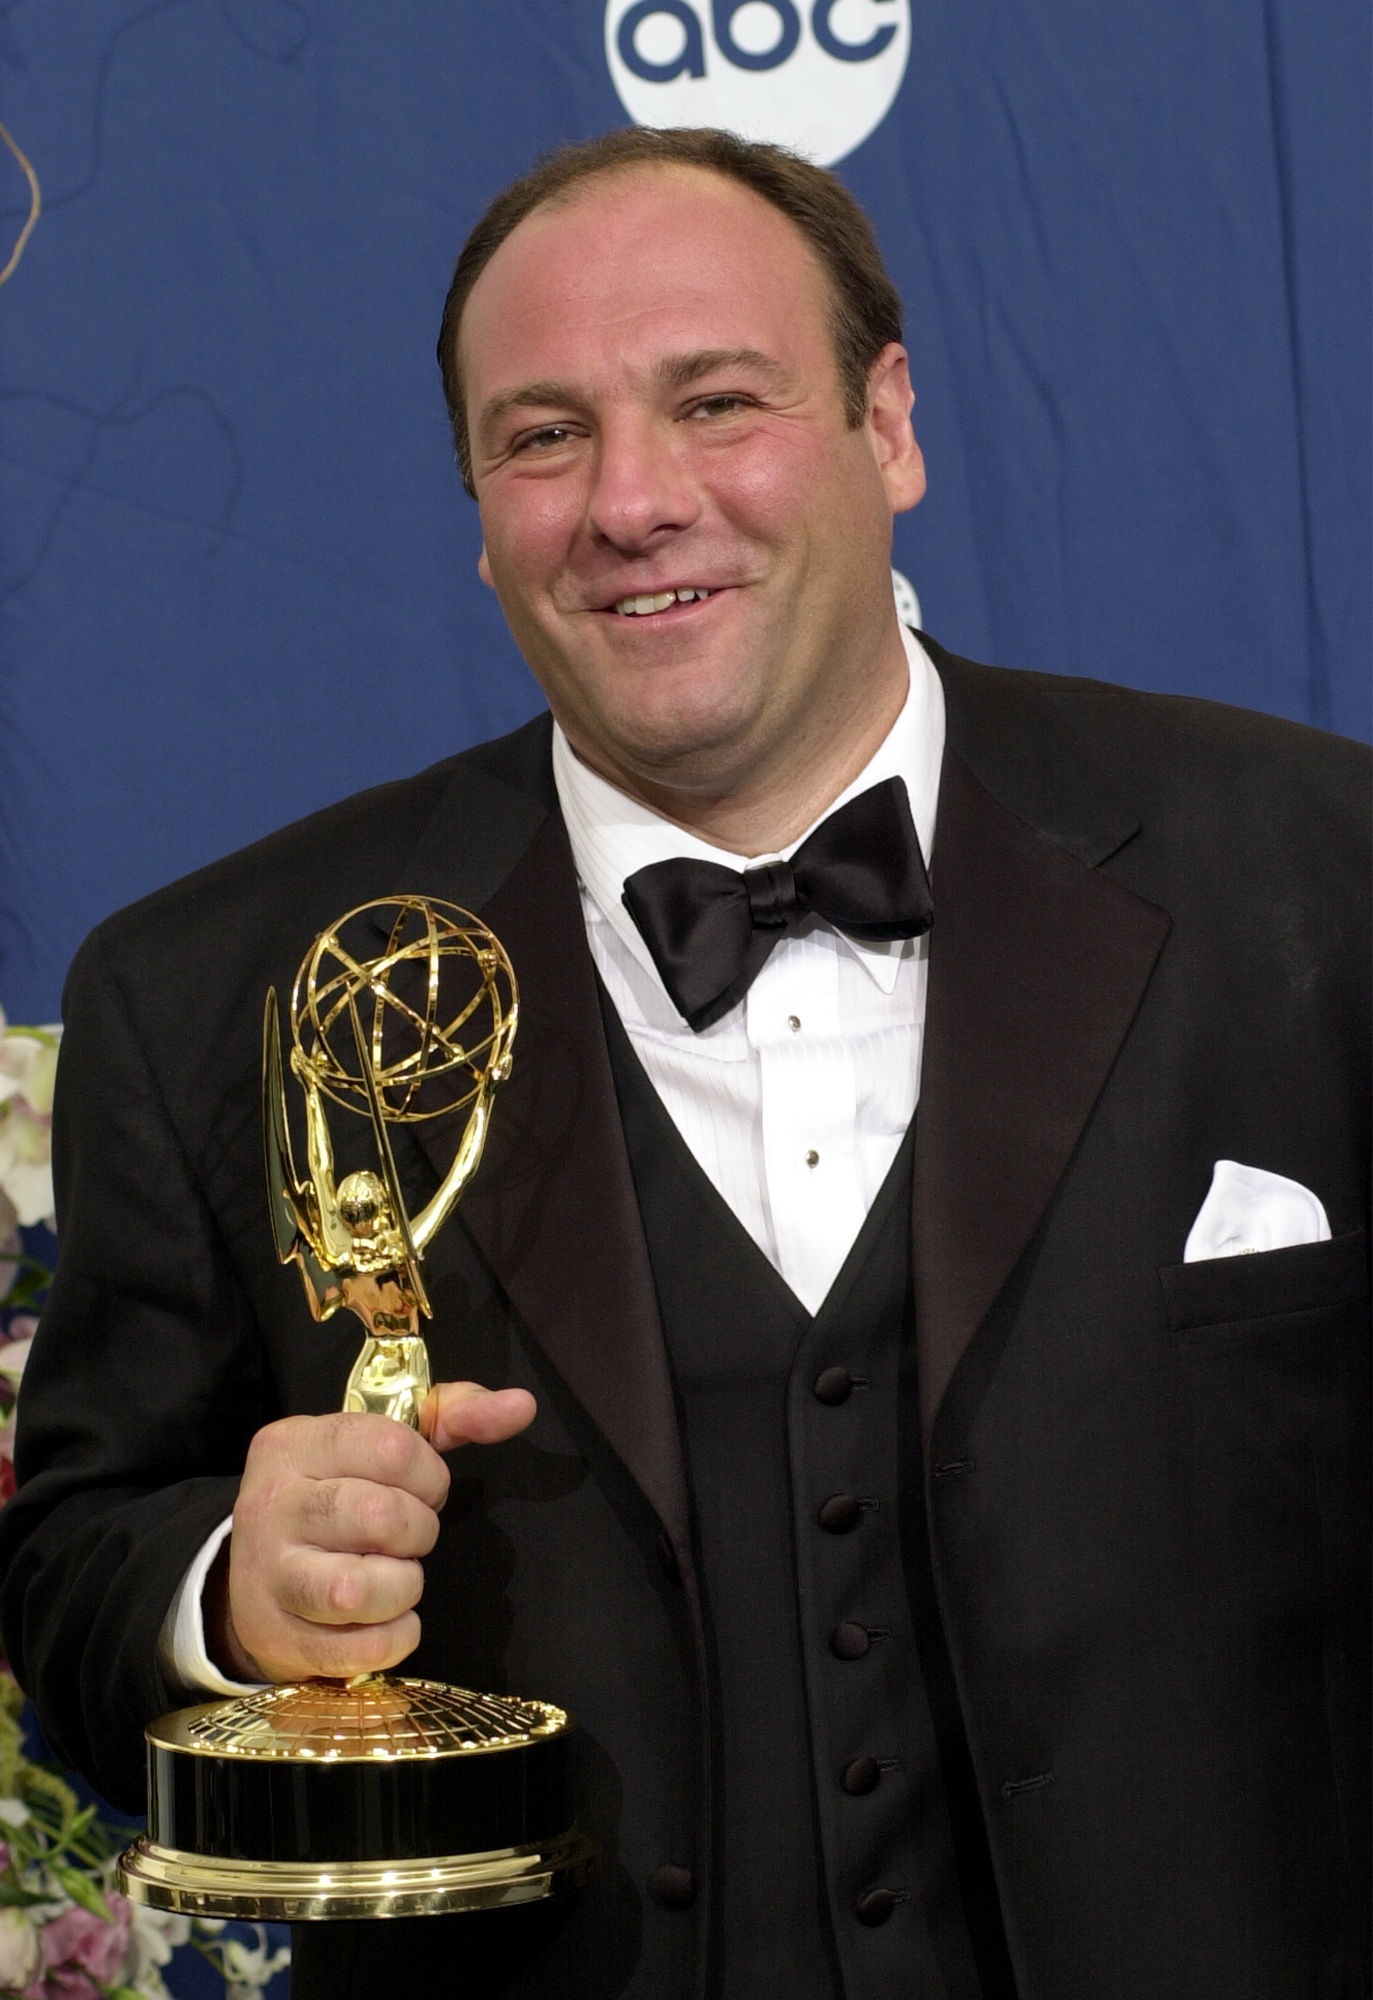 James Gandolfini at the 52nd Annual Emmy Awards in Los Angeles, California on September 10, 2000 | Source: Getty Images